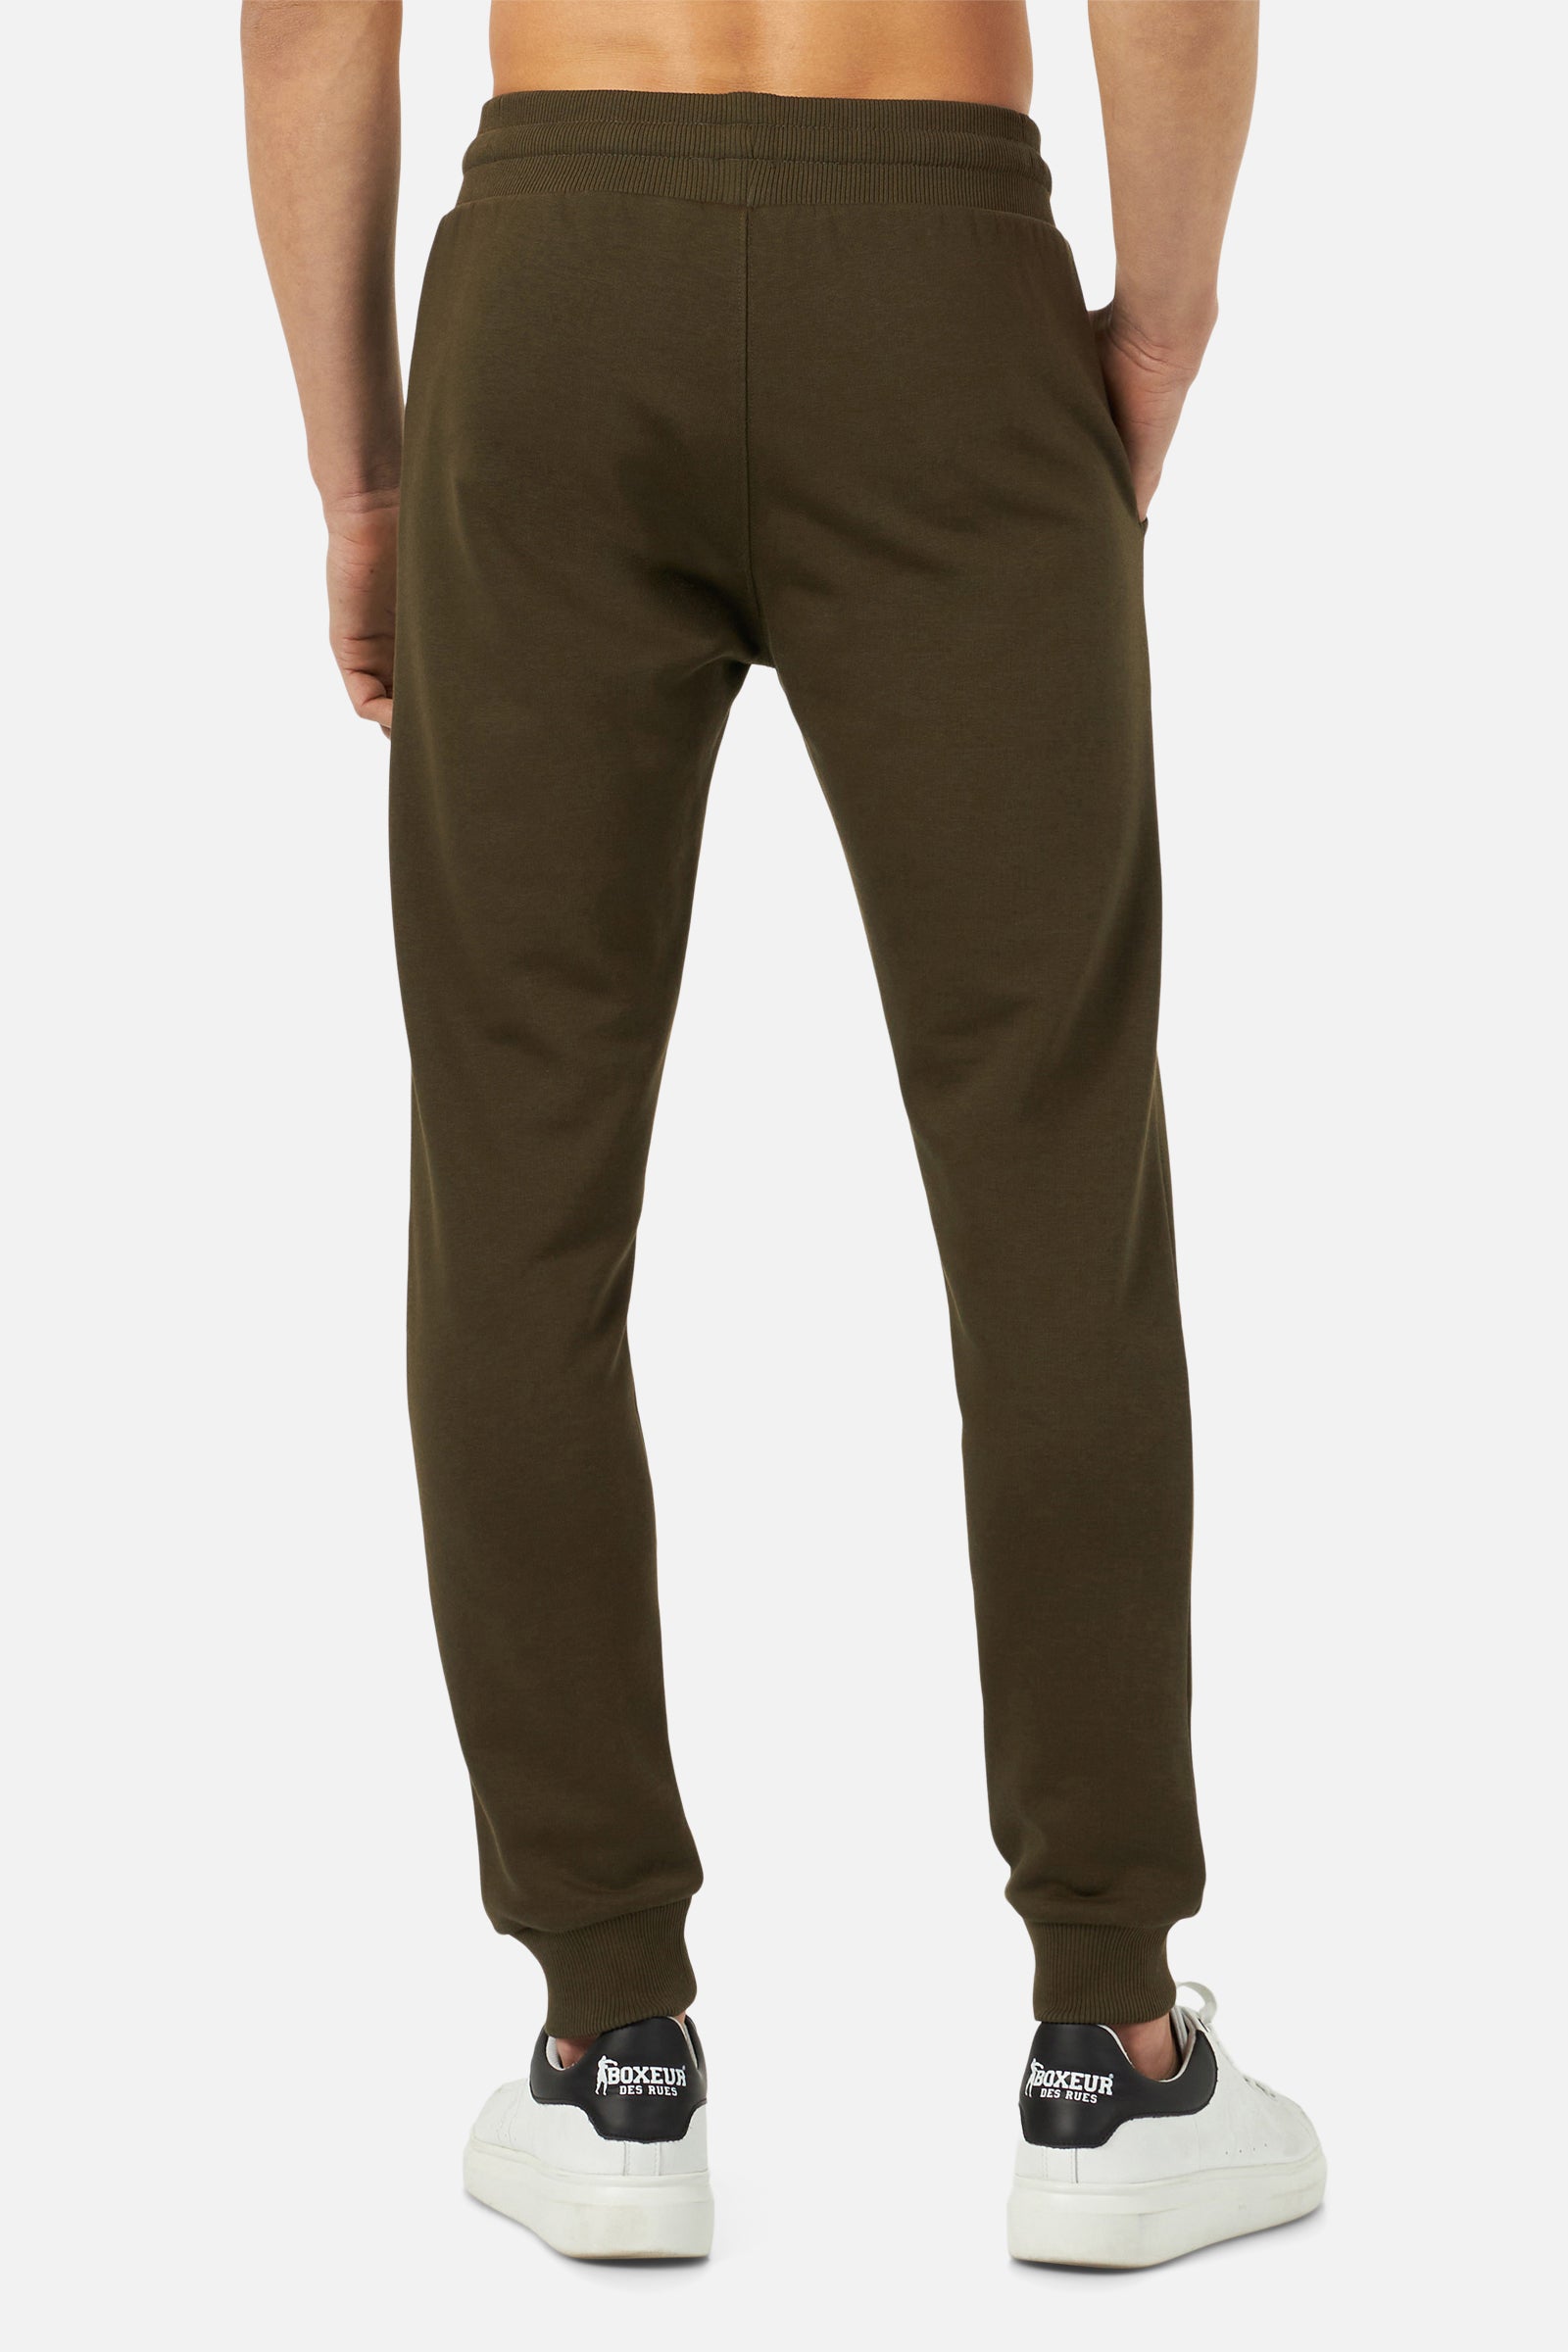 Slim Fit Sweatpant With Logo in Army Hosen Boxeur des Rues   